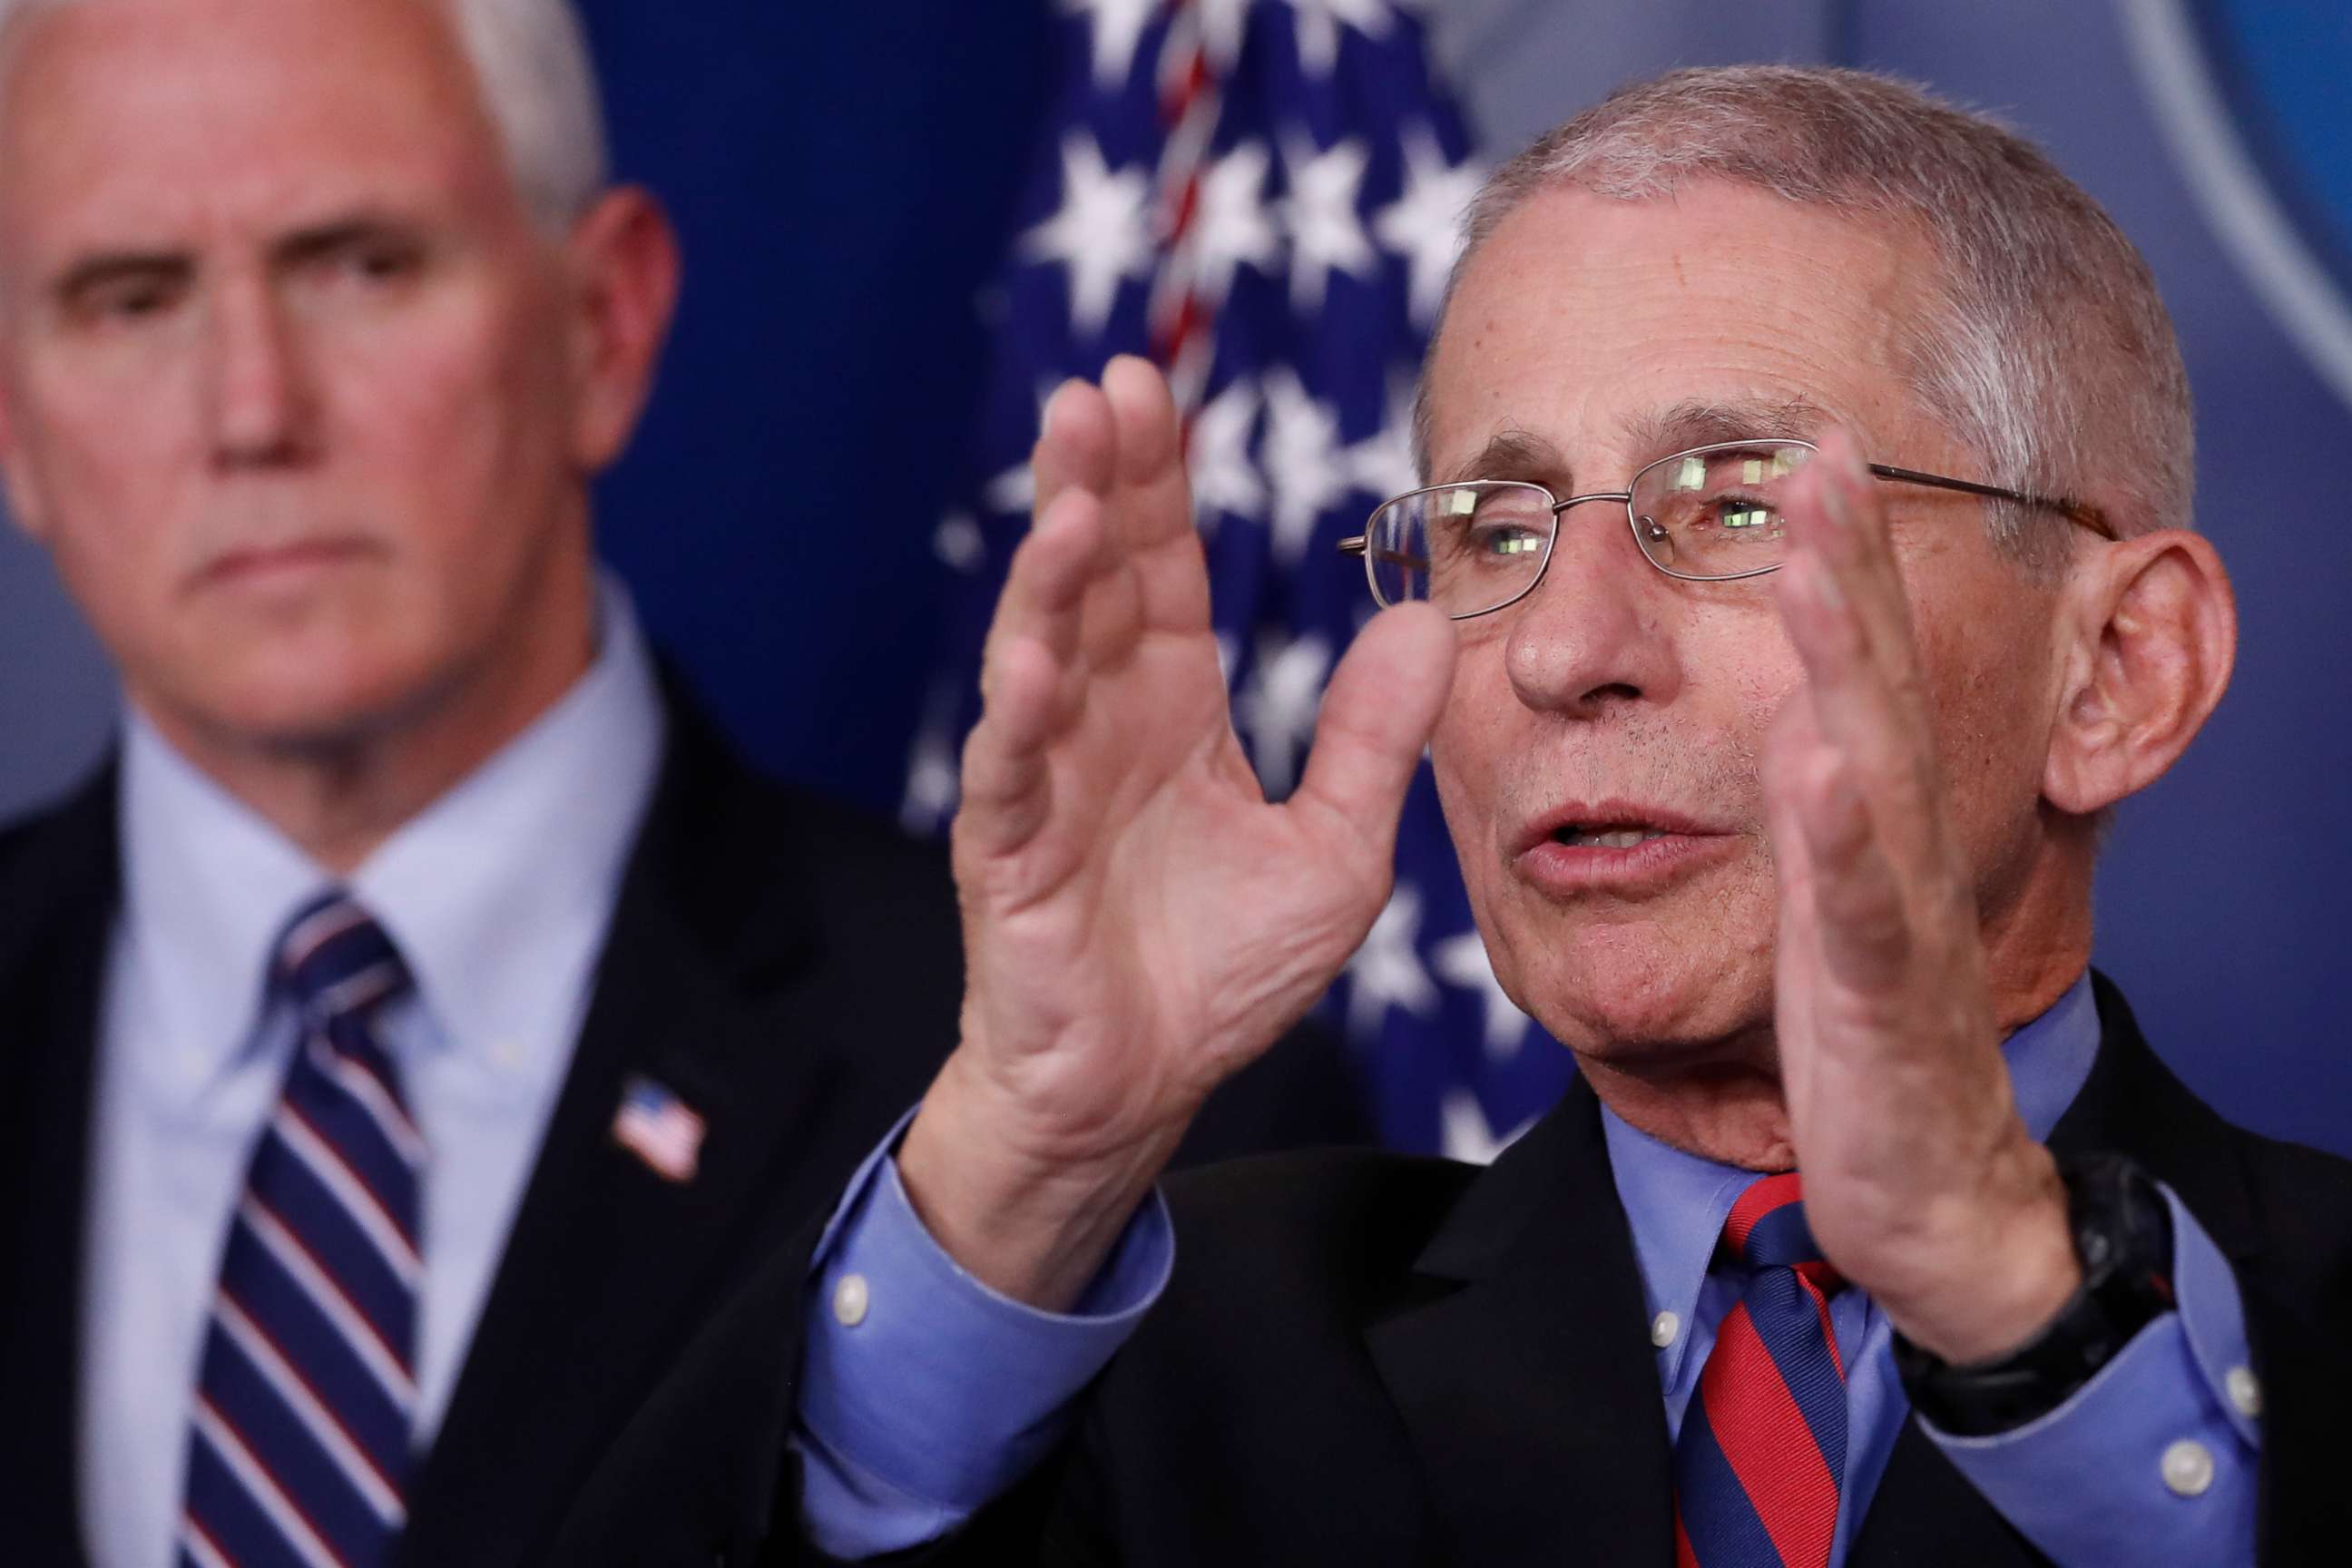 PHOTO: Dr. Anthony Fauci speaks about the coronavirus in the James Brady Briefing Room, March 25, 2020, in Washington, as Vice President Mike Pence listens.